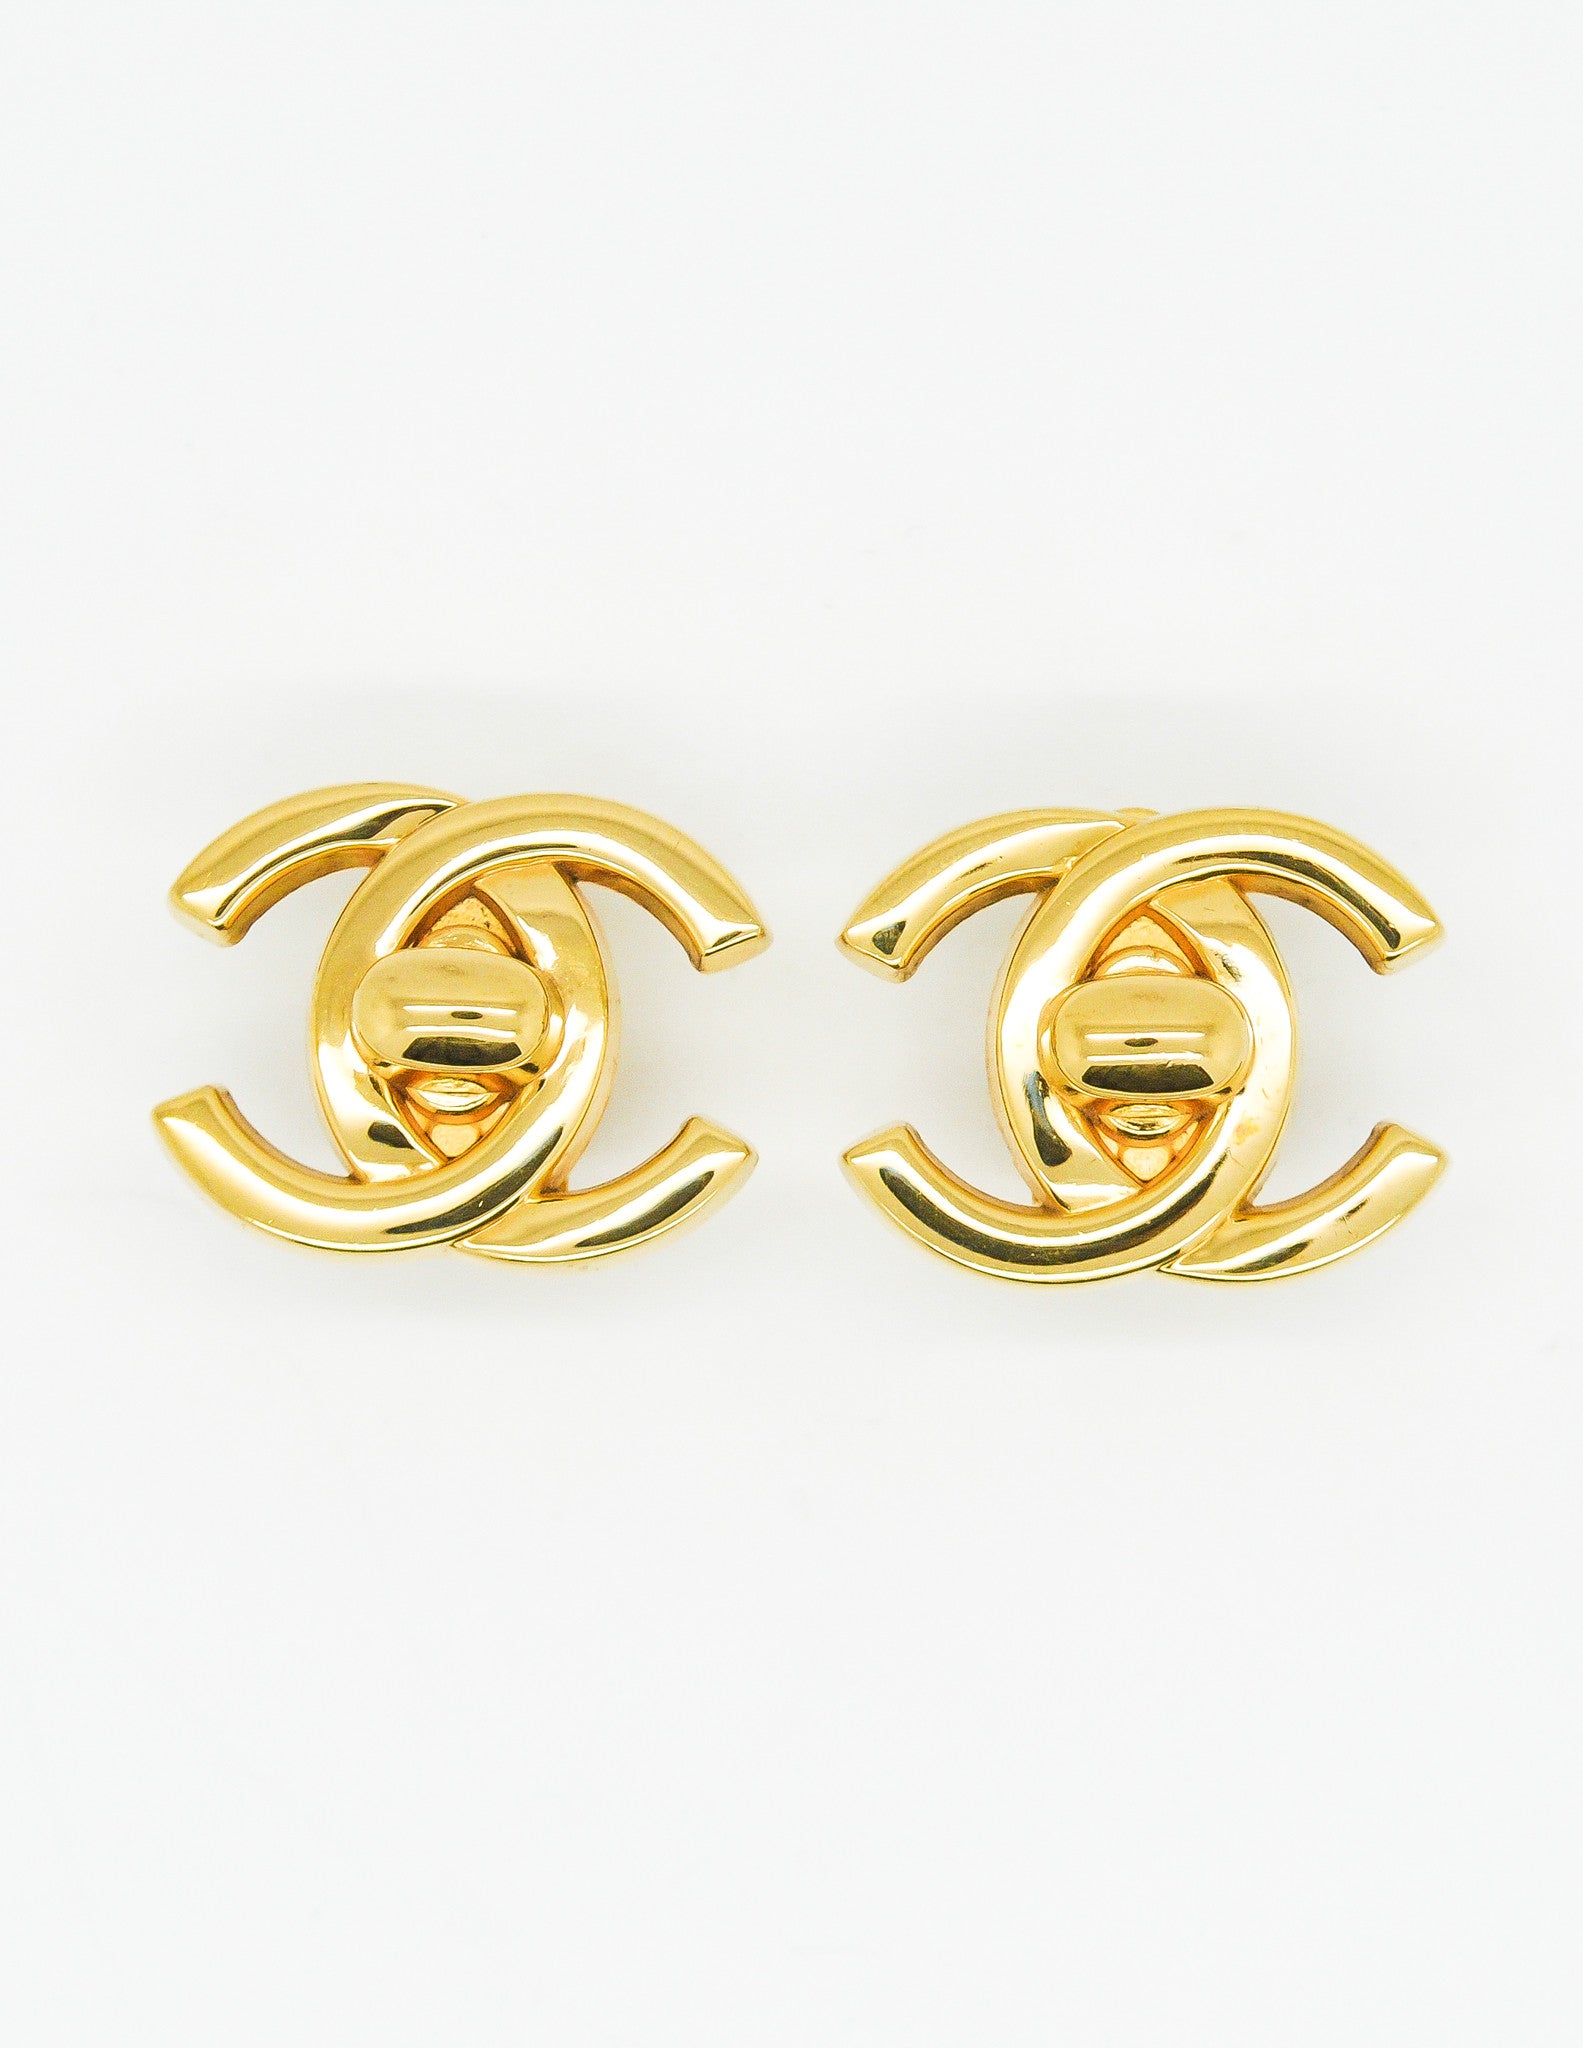 Chanel Vintage Turn Lock CC Clasp Earrings - from Amarcord Vintage Fashion